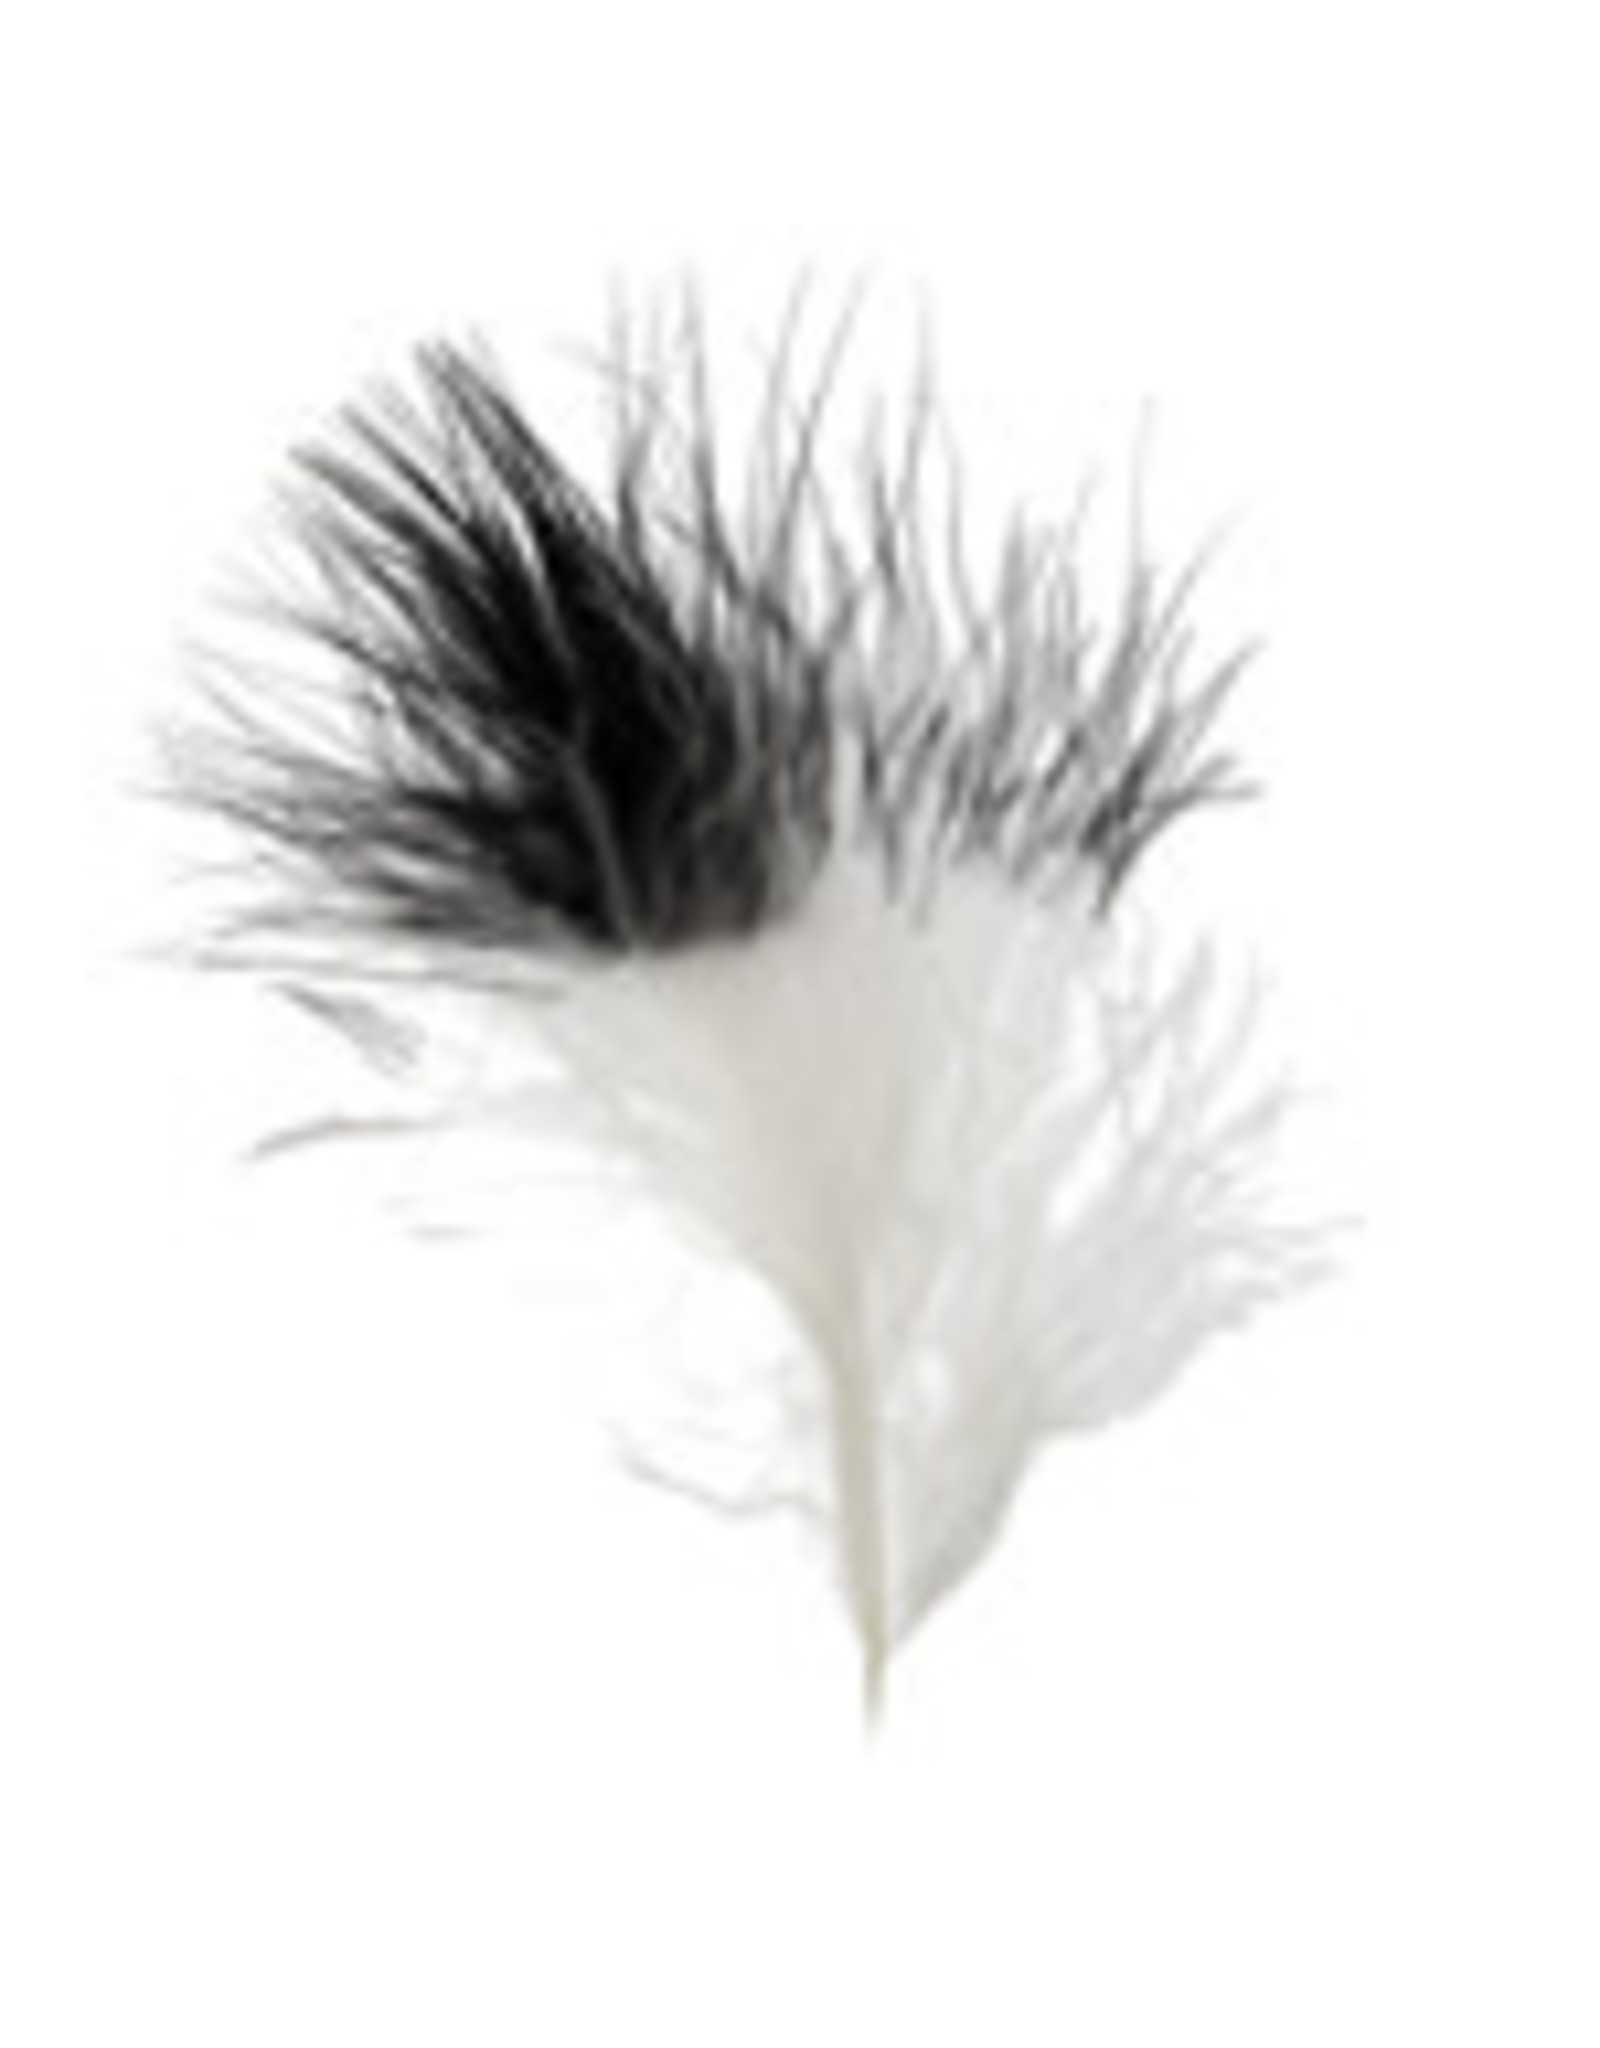 Marabou Feathers 4-6in White Black  Tip  6g